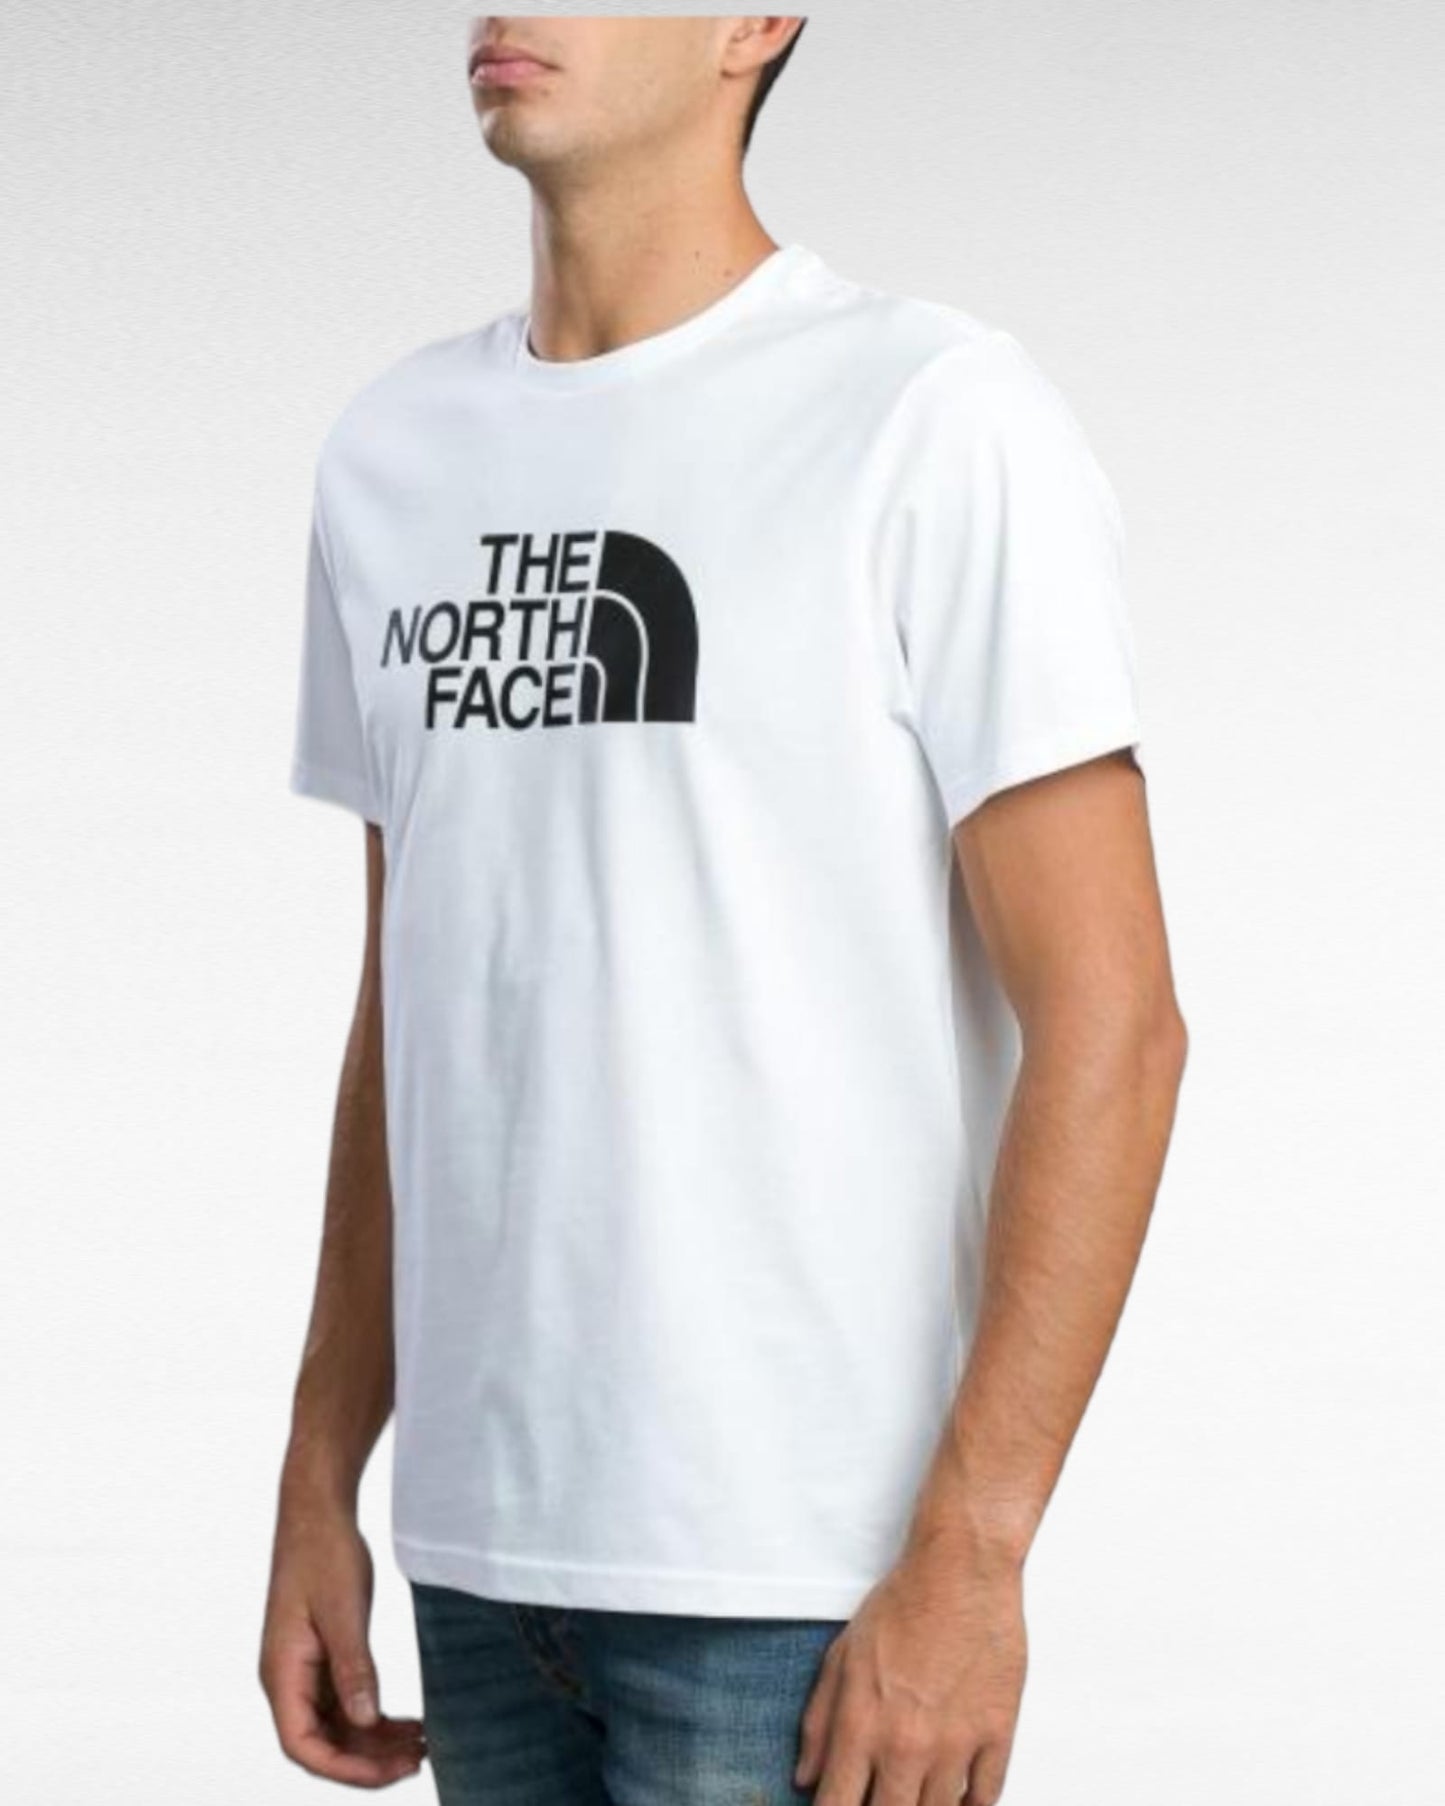 T-Shirt The North Face TX3FN41